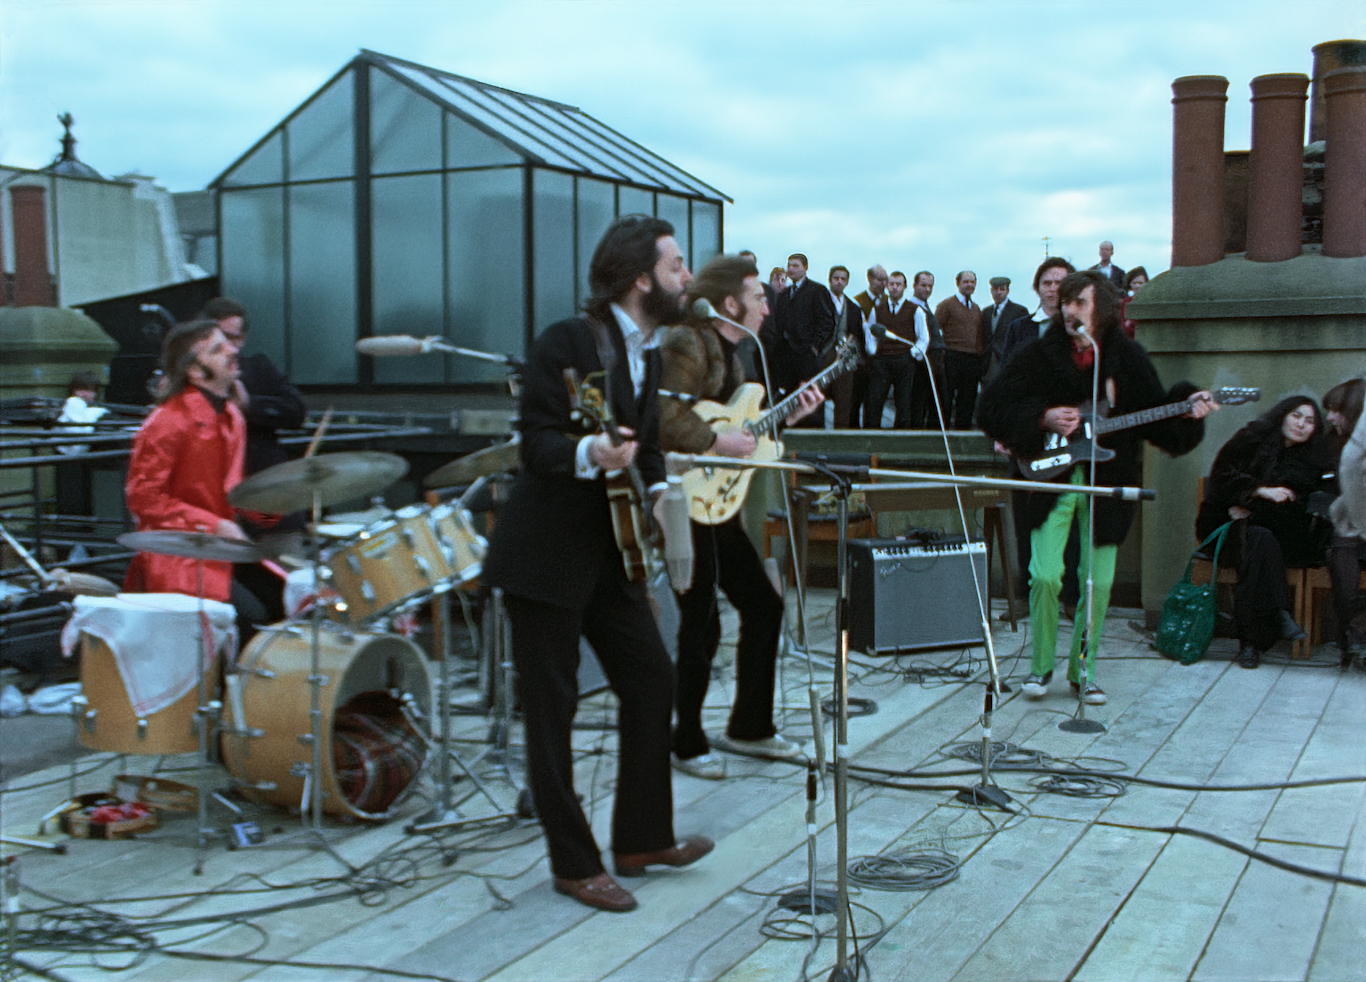 THE BEATLES' legendary rooftop concert from Peter Jackson’s “The Beatles: Get Back” to make theatrical debut exclusively in Imax 3